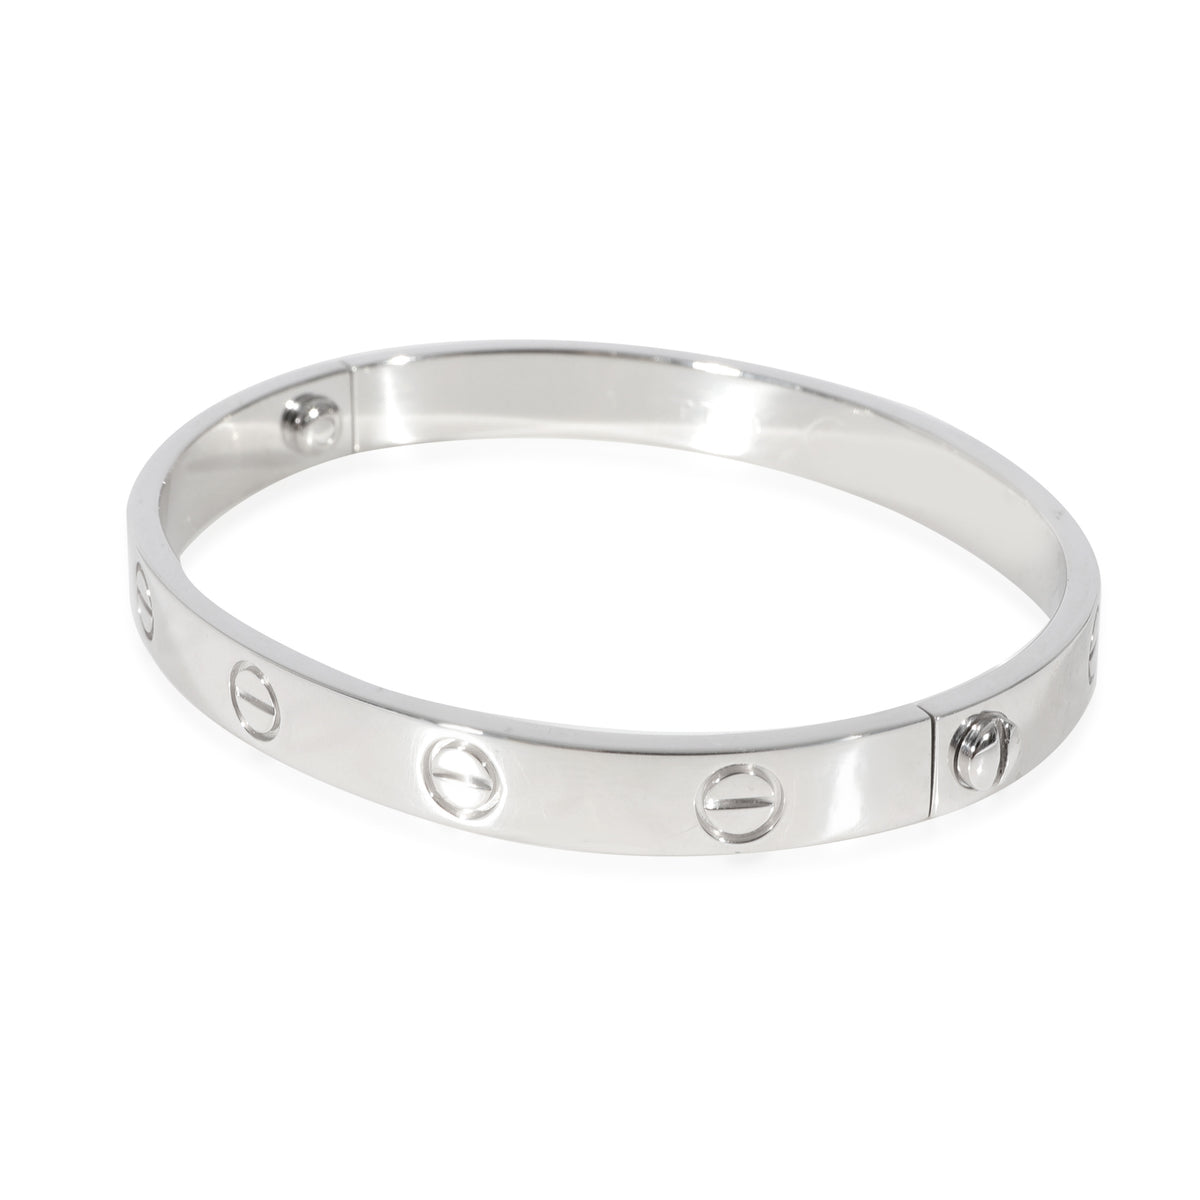 Cartier LOVE Bracelet in 18k White Gold With 4 Diamonds - Cartier Love  Bracelets - Cartier Jewelry